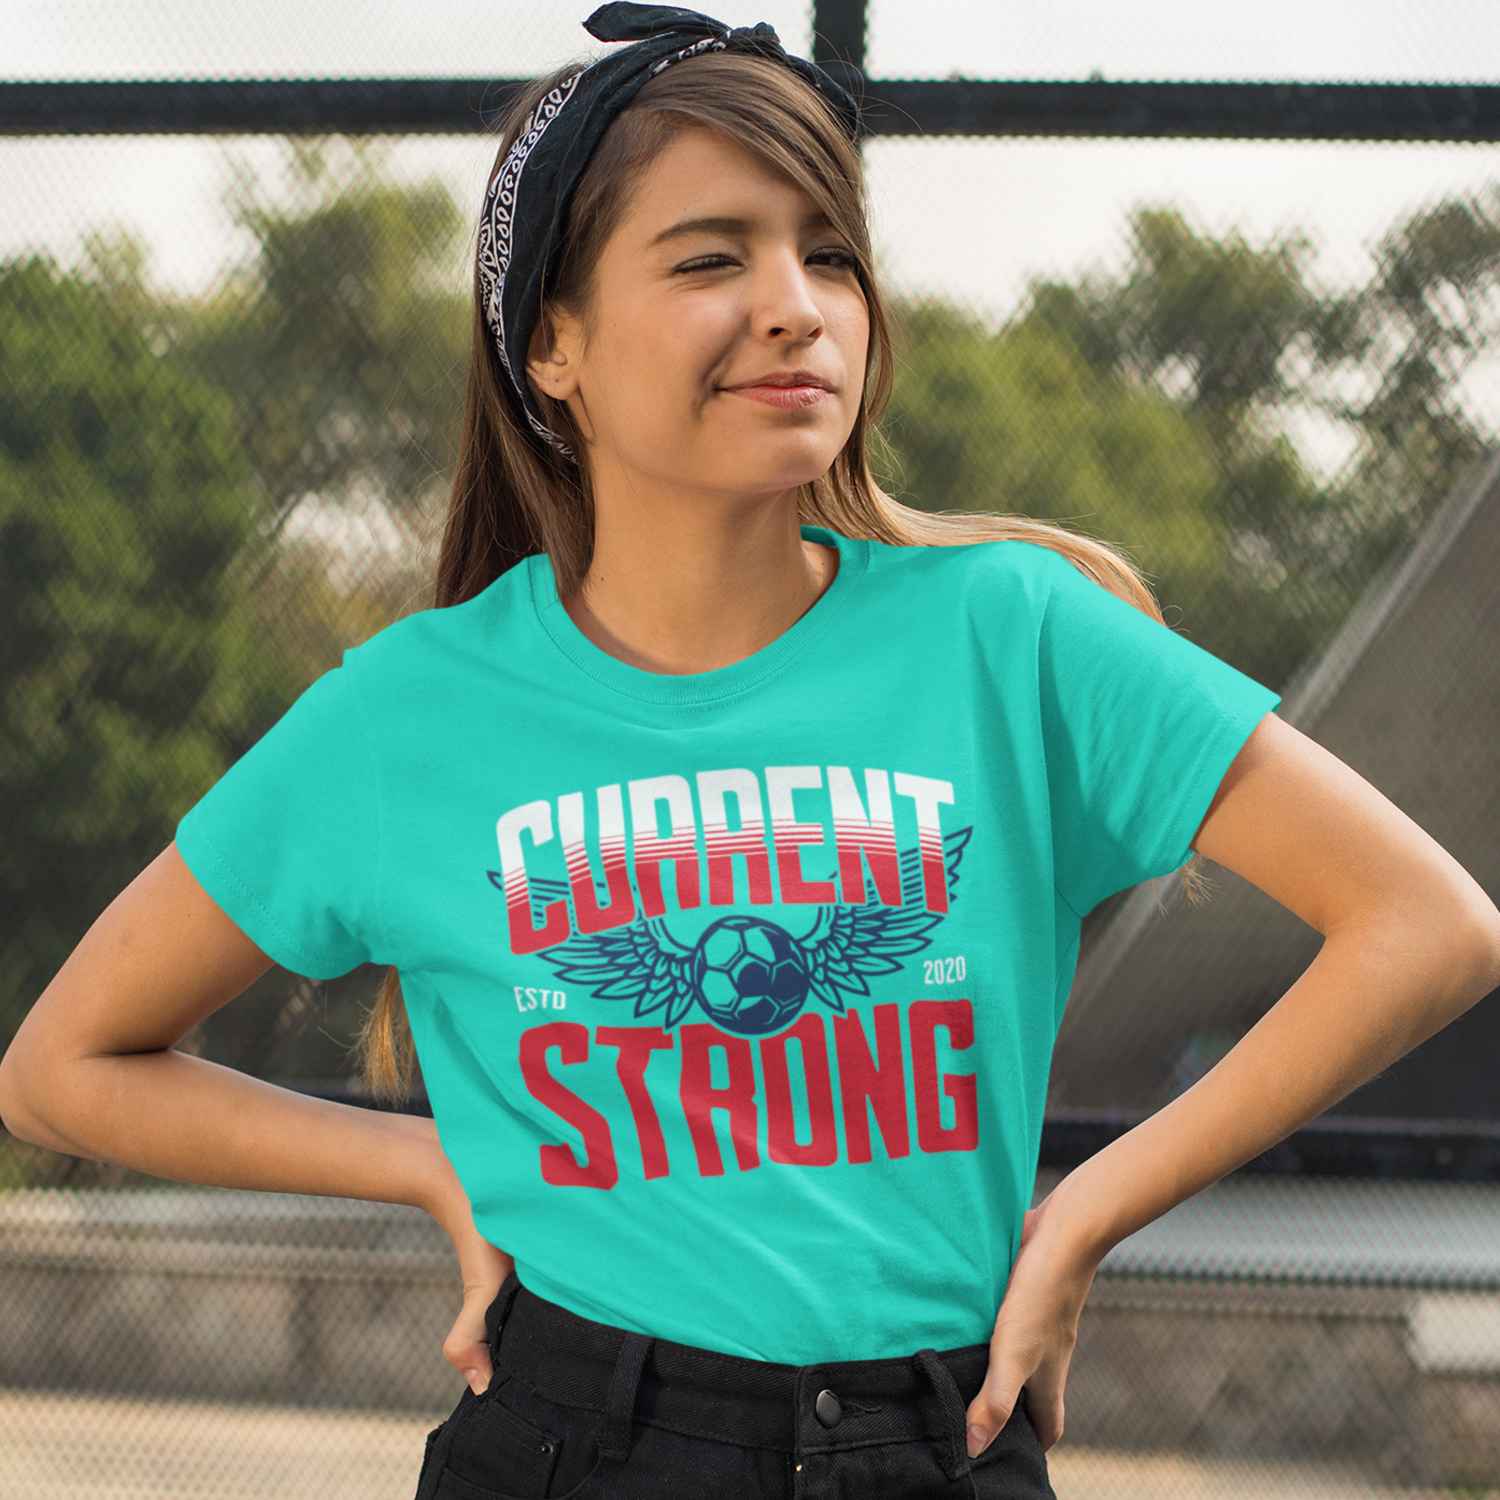 KC Swag Kansas City Current CURRENT STRONG on teal unisex t-shirt worn by female model in public park